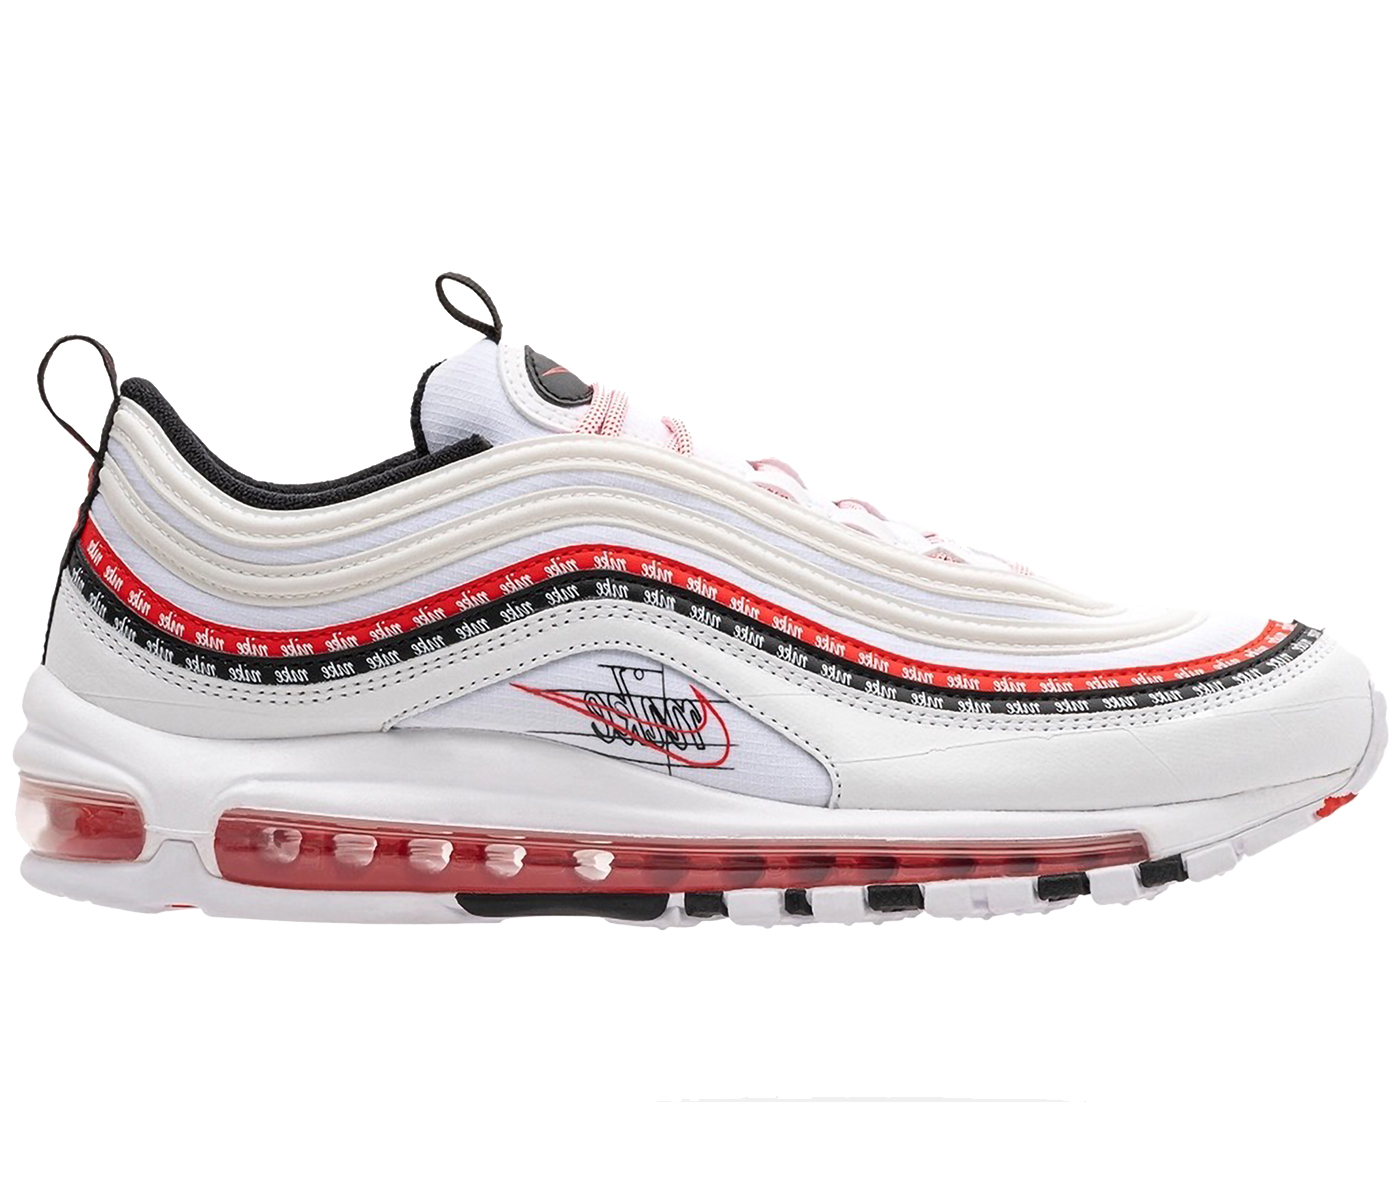 undefeated nike air max 97 stockx